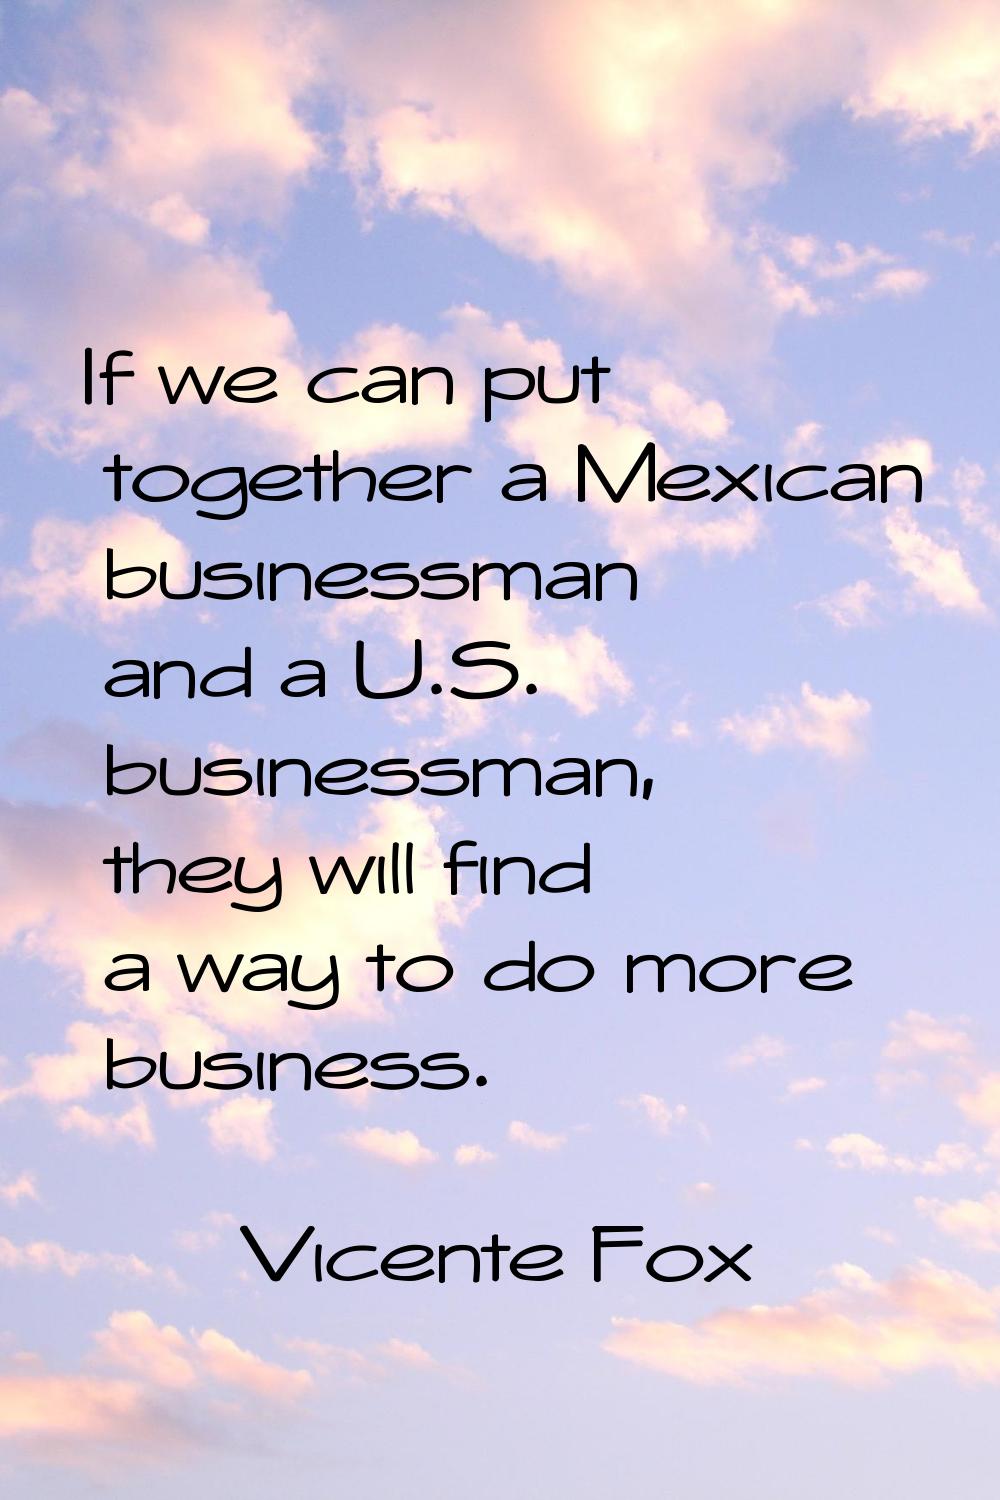 If we can put together a Mexican businessman and a U.S. businessman, they will find a way to do mor